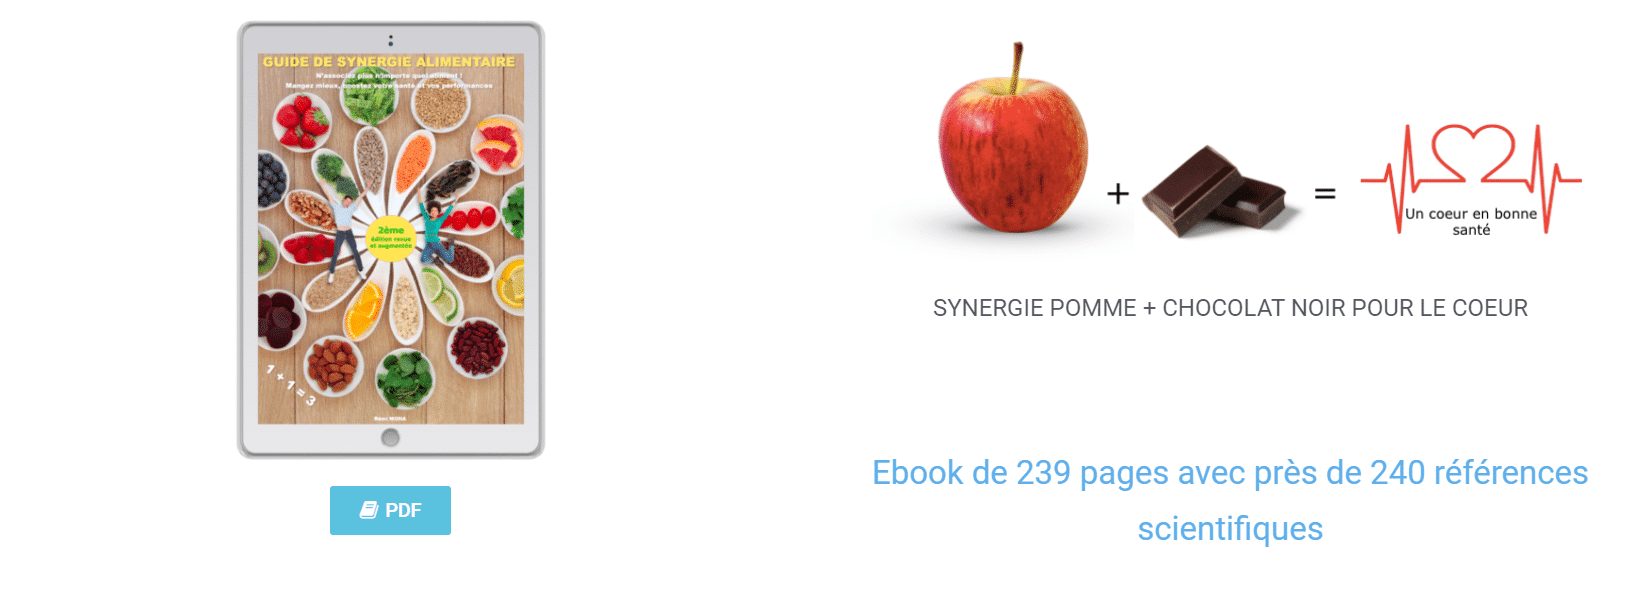 GUIDE DE SYNERGIE ALIMENTAIRE